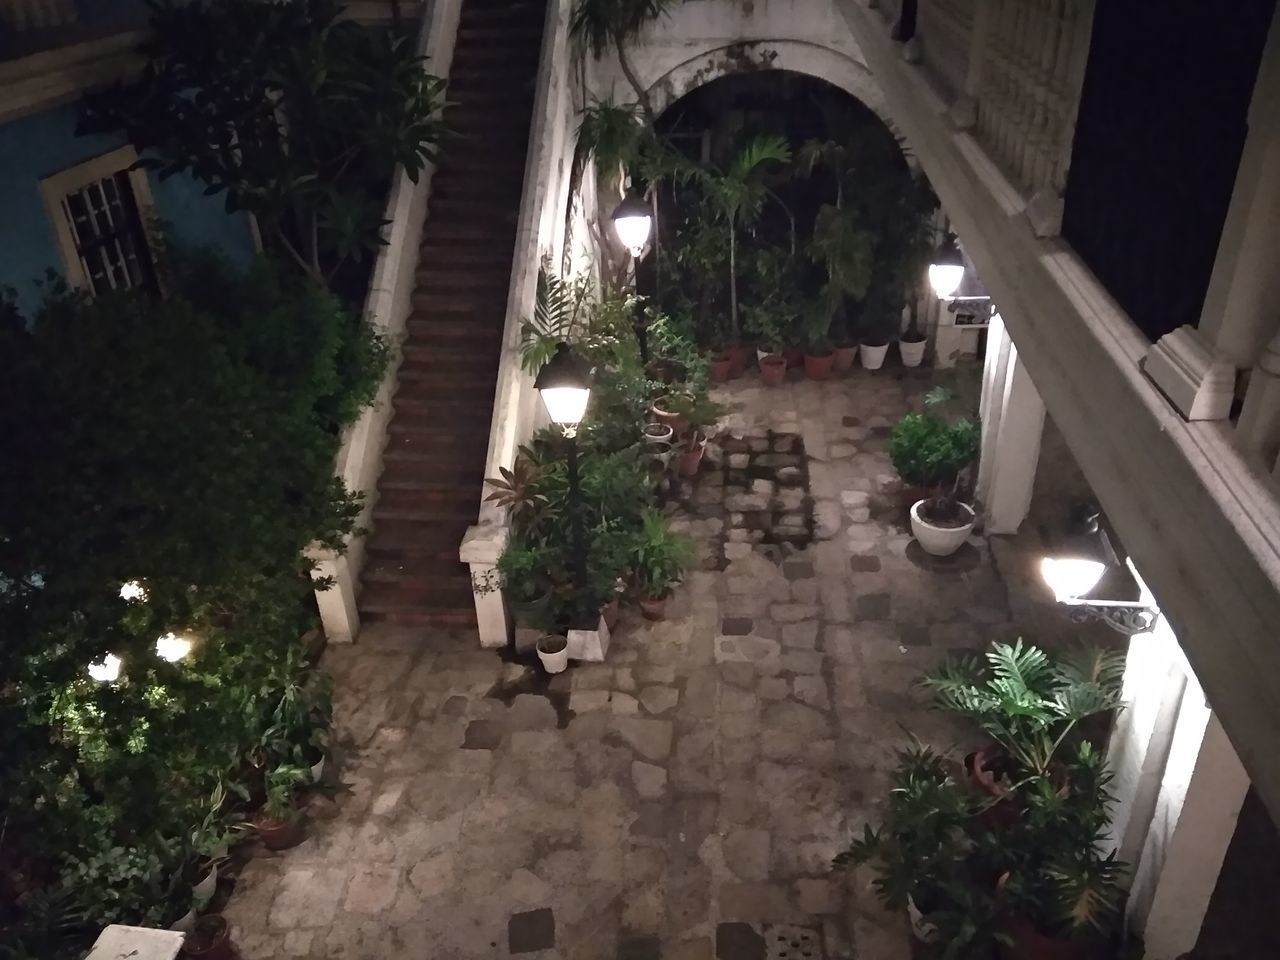 HIGH ANGLE VIEW OF POTTED PLANTS OUTSIDE BUILDING AT NIGHT